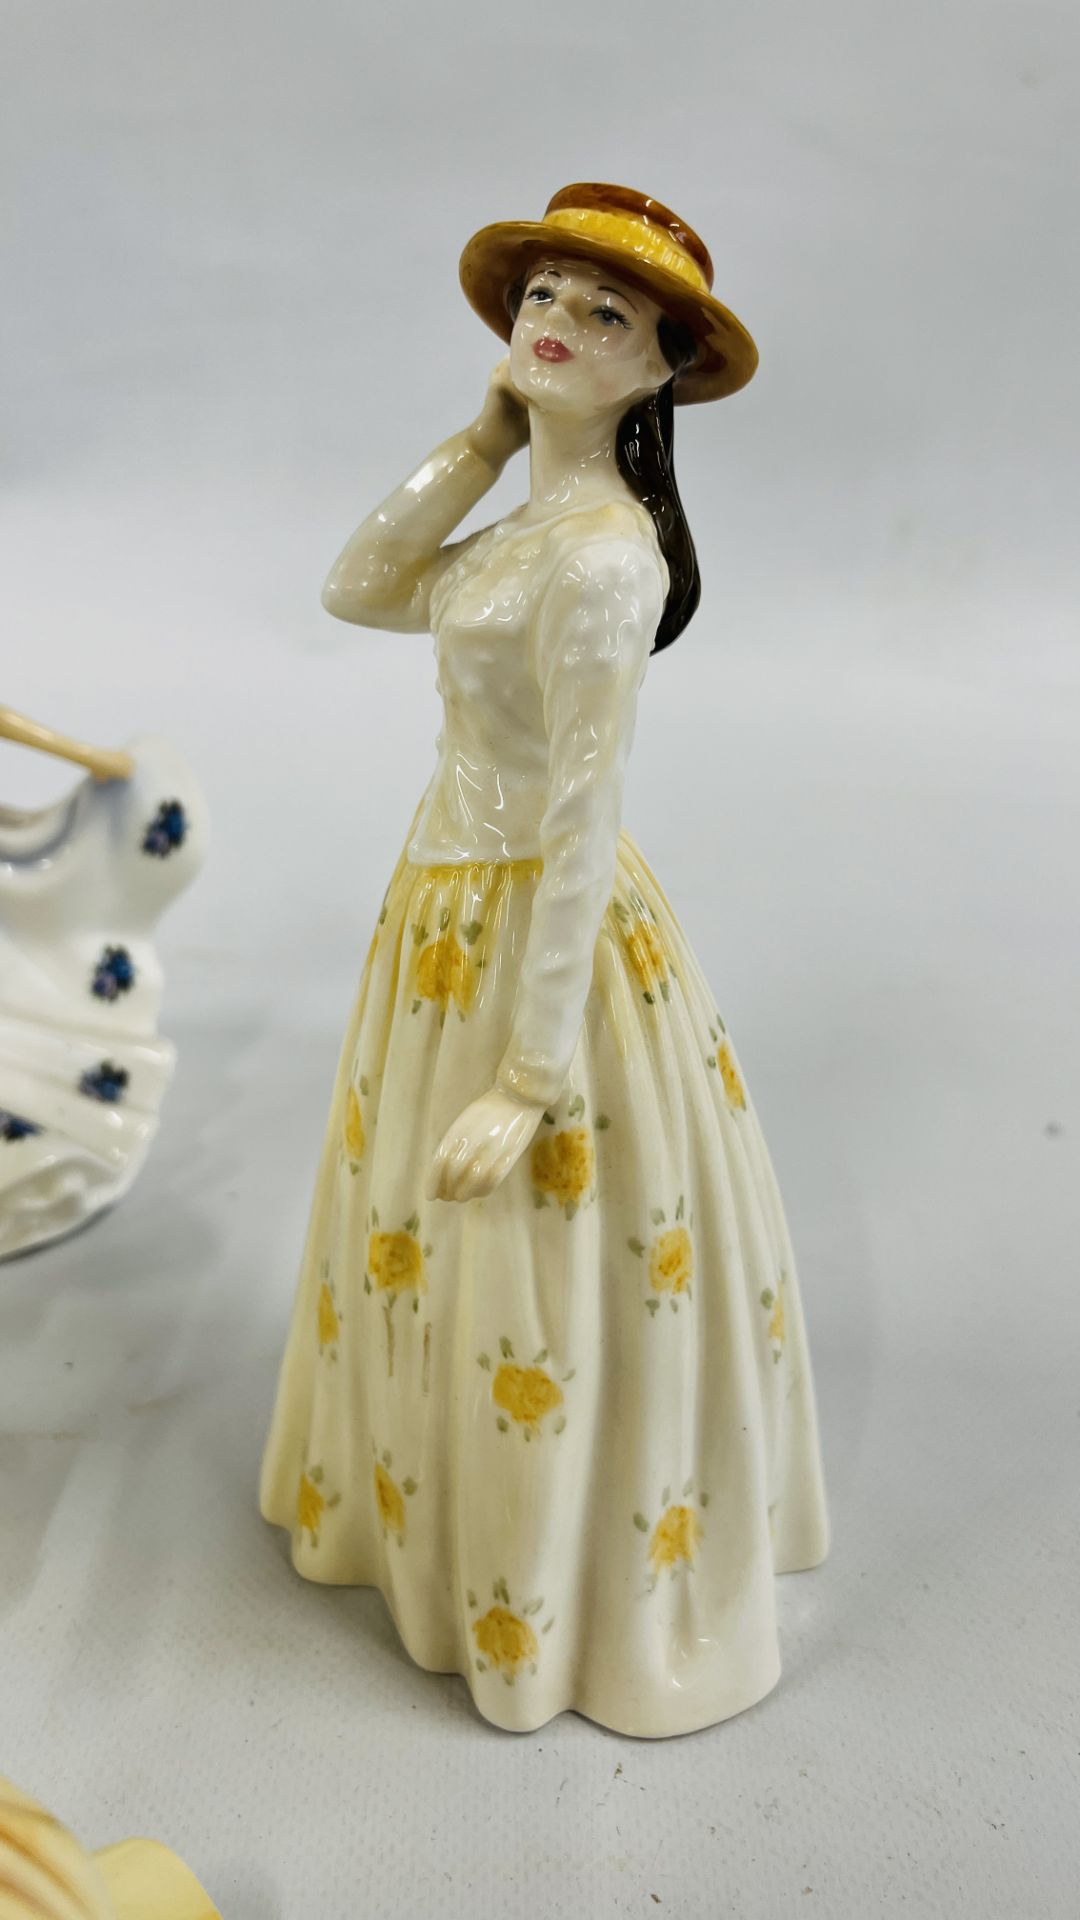 6 ROYAL DOULTON CABINET COLLECTOR FIGURES TO INCLUDE "FLOWERS FOR YOU" HN 3889, - Image 5 of 11